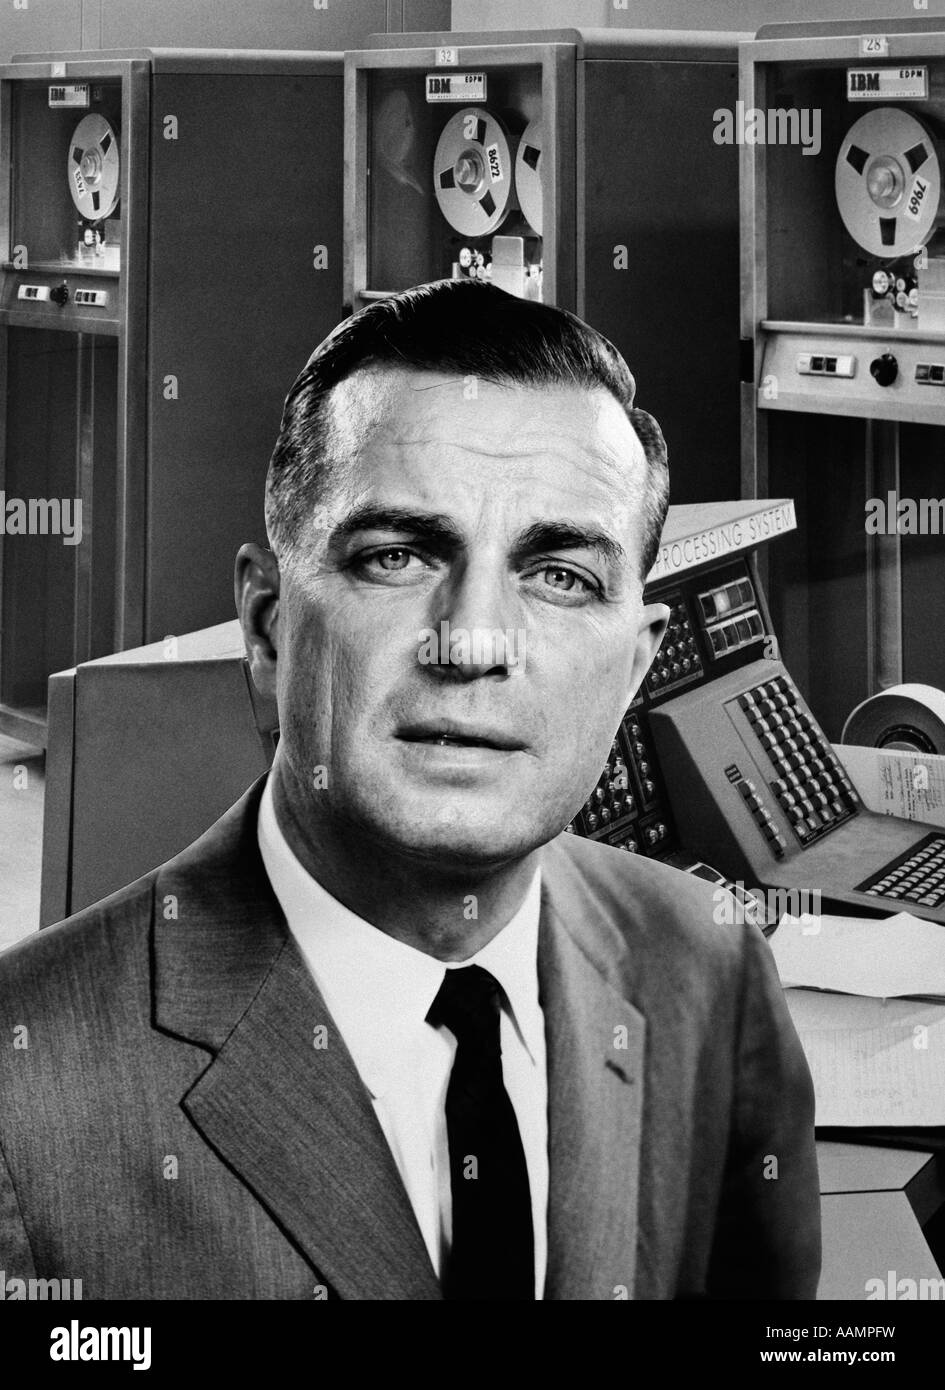 1960s BUSINESSMAN PORTRAIT SUPERIMPOSED ON BACKGROUND OF LARGE COMPUTER SYSTEM Stock Photo